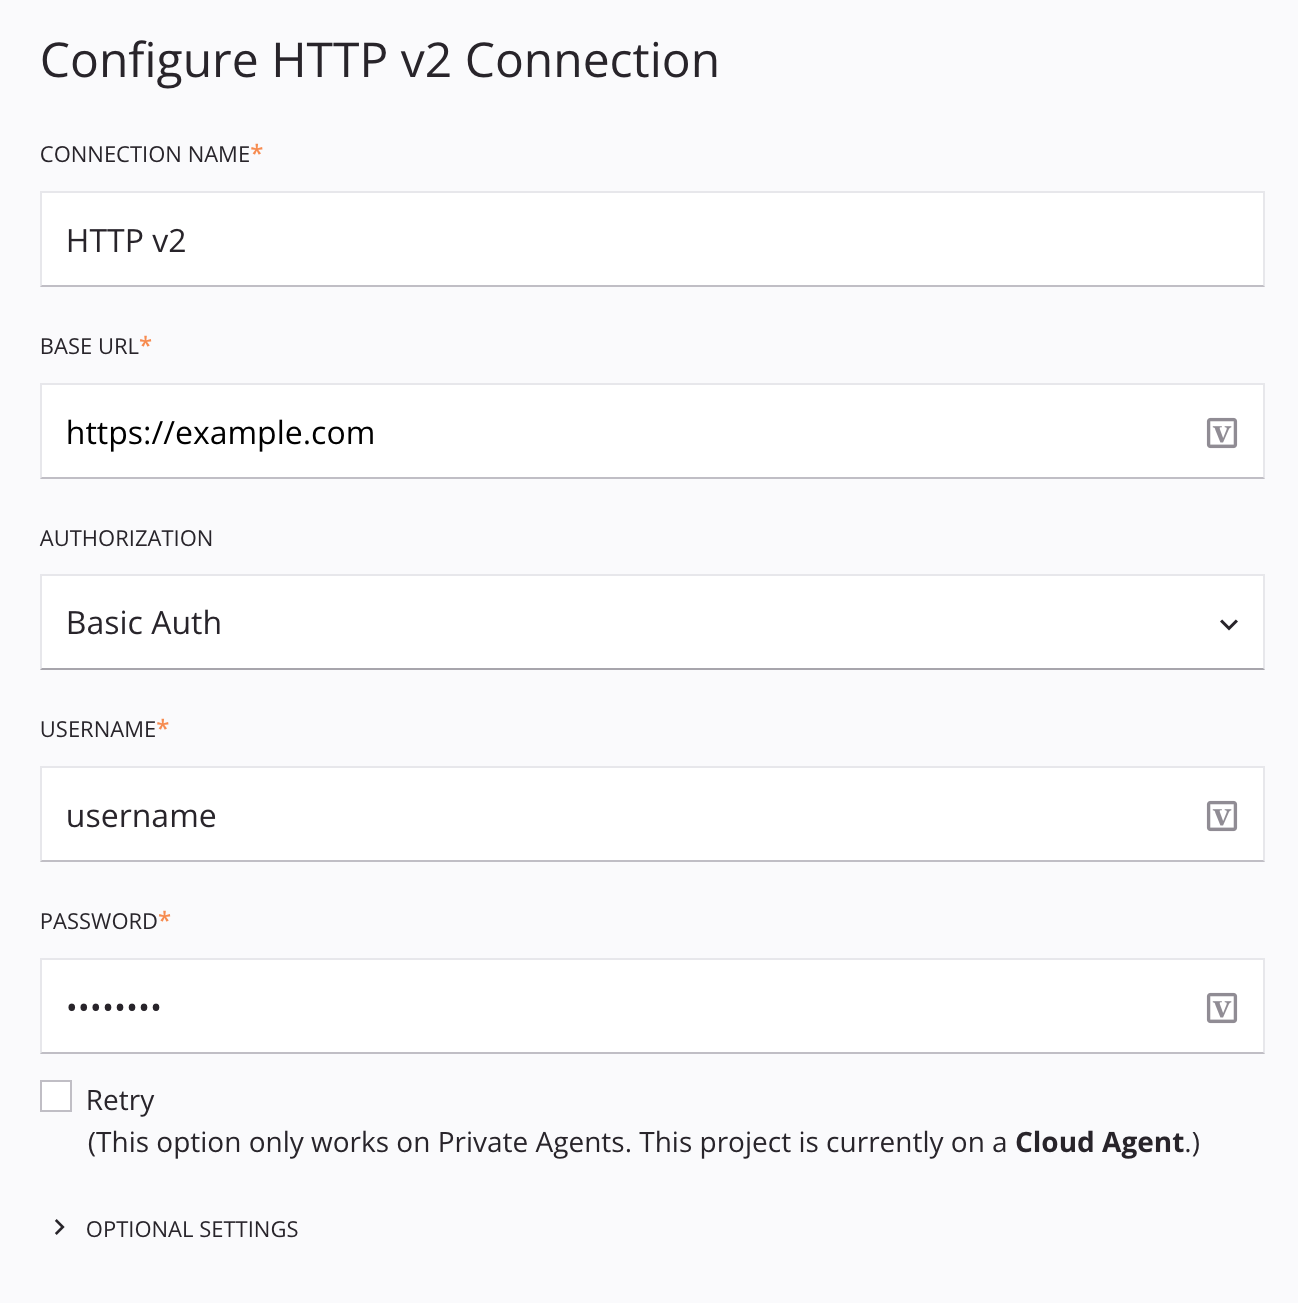 HTTP v2 connection example